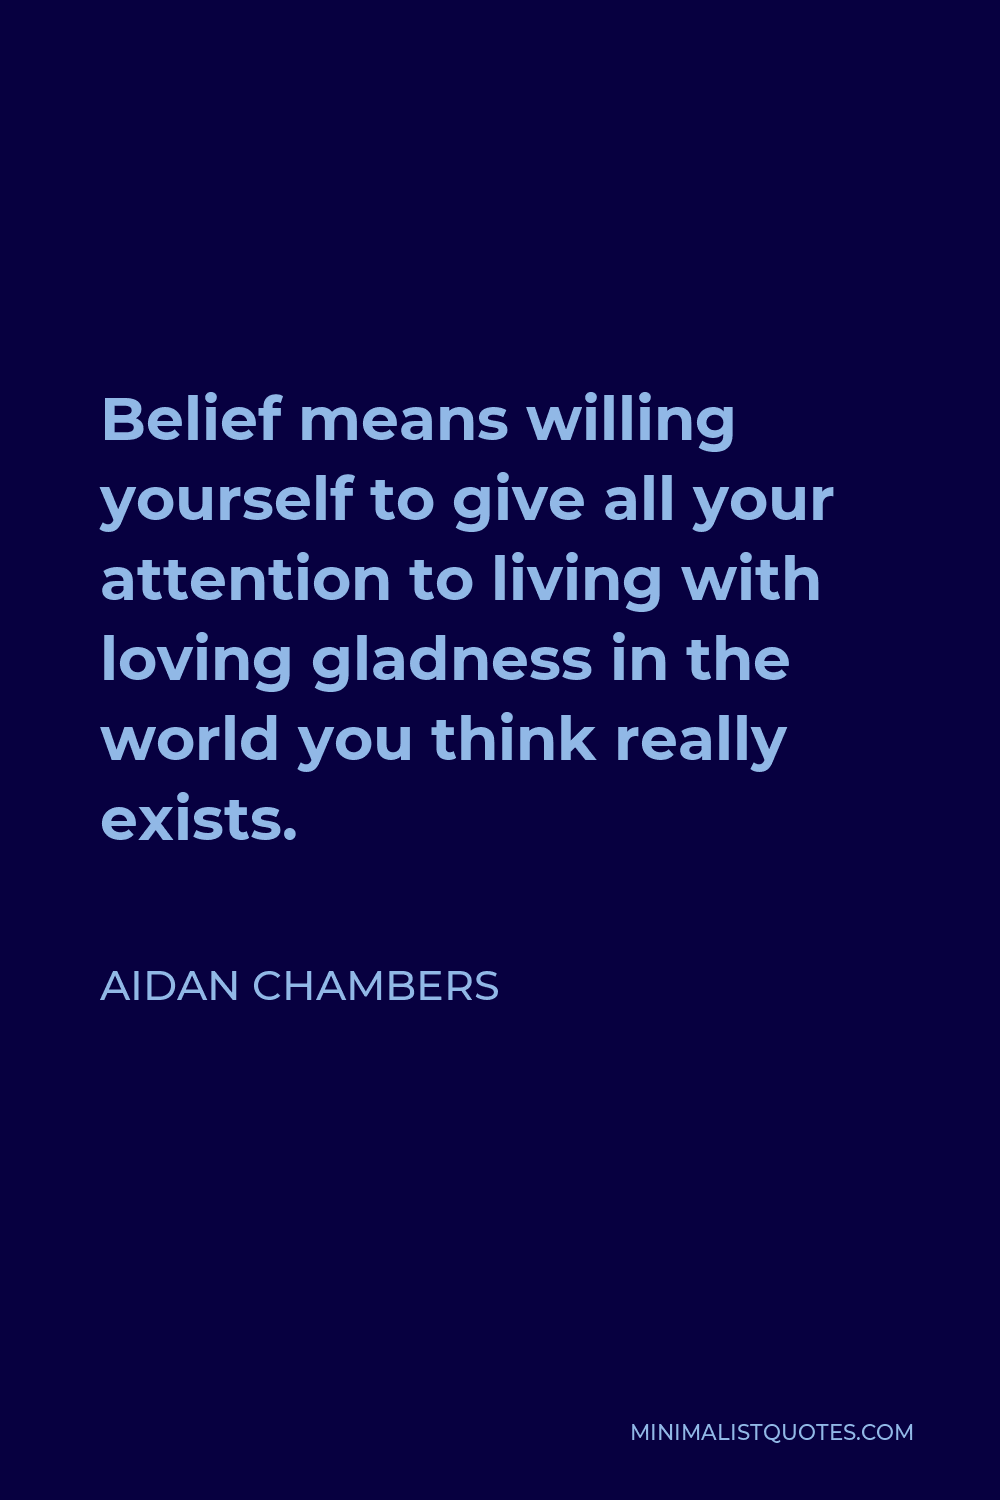 Aidan Chambers Quote - Belief means willing yourself to give all your attention to living with loving gladness in the world you think really exists.